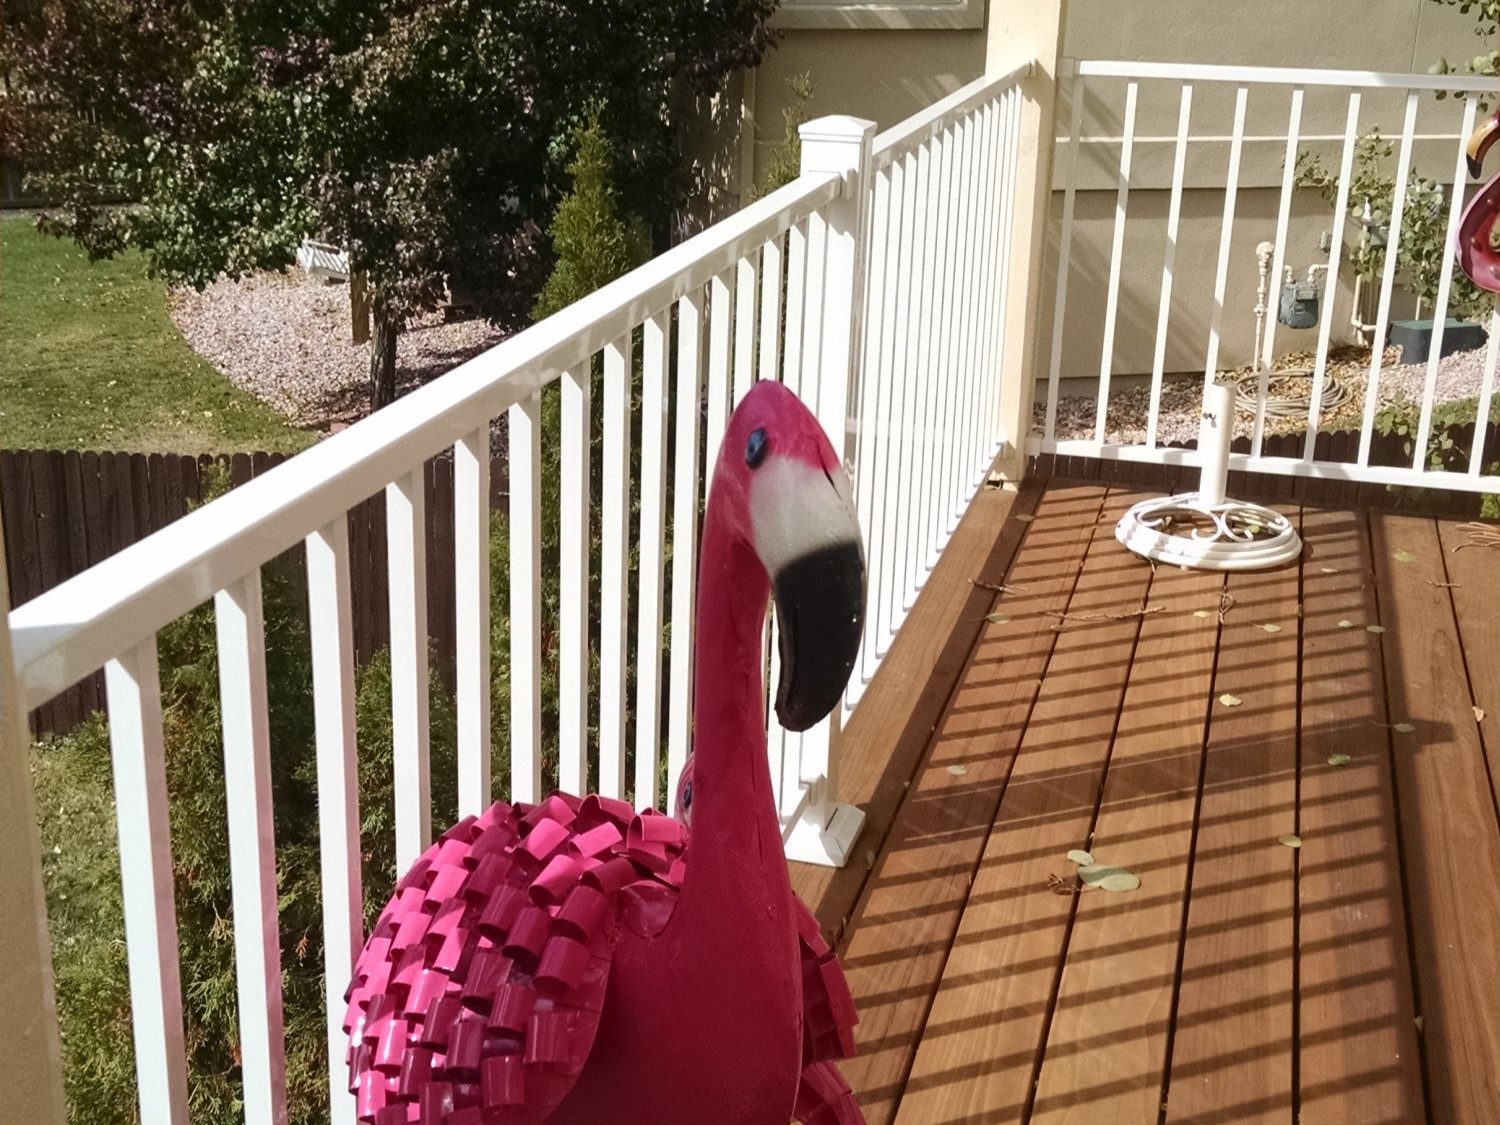 Redwood deck with a white, aluminum deck railing. There is a plastic flamingo ornament in the foreground.